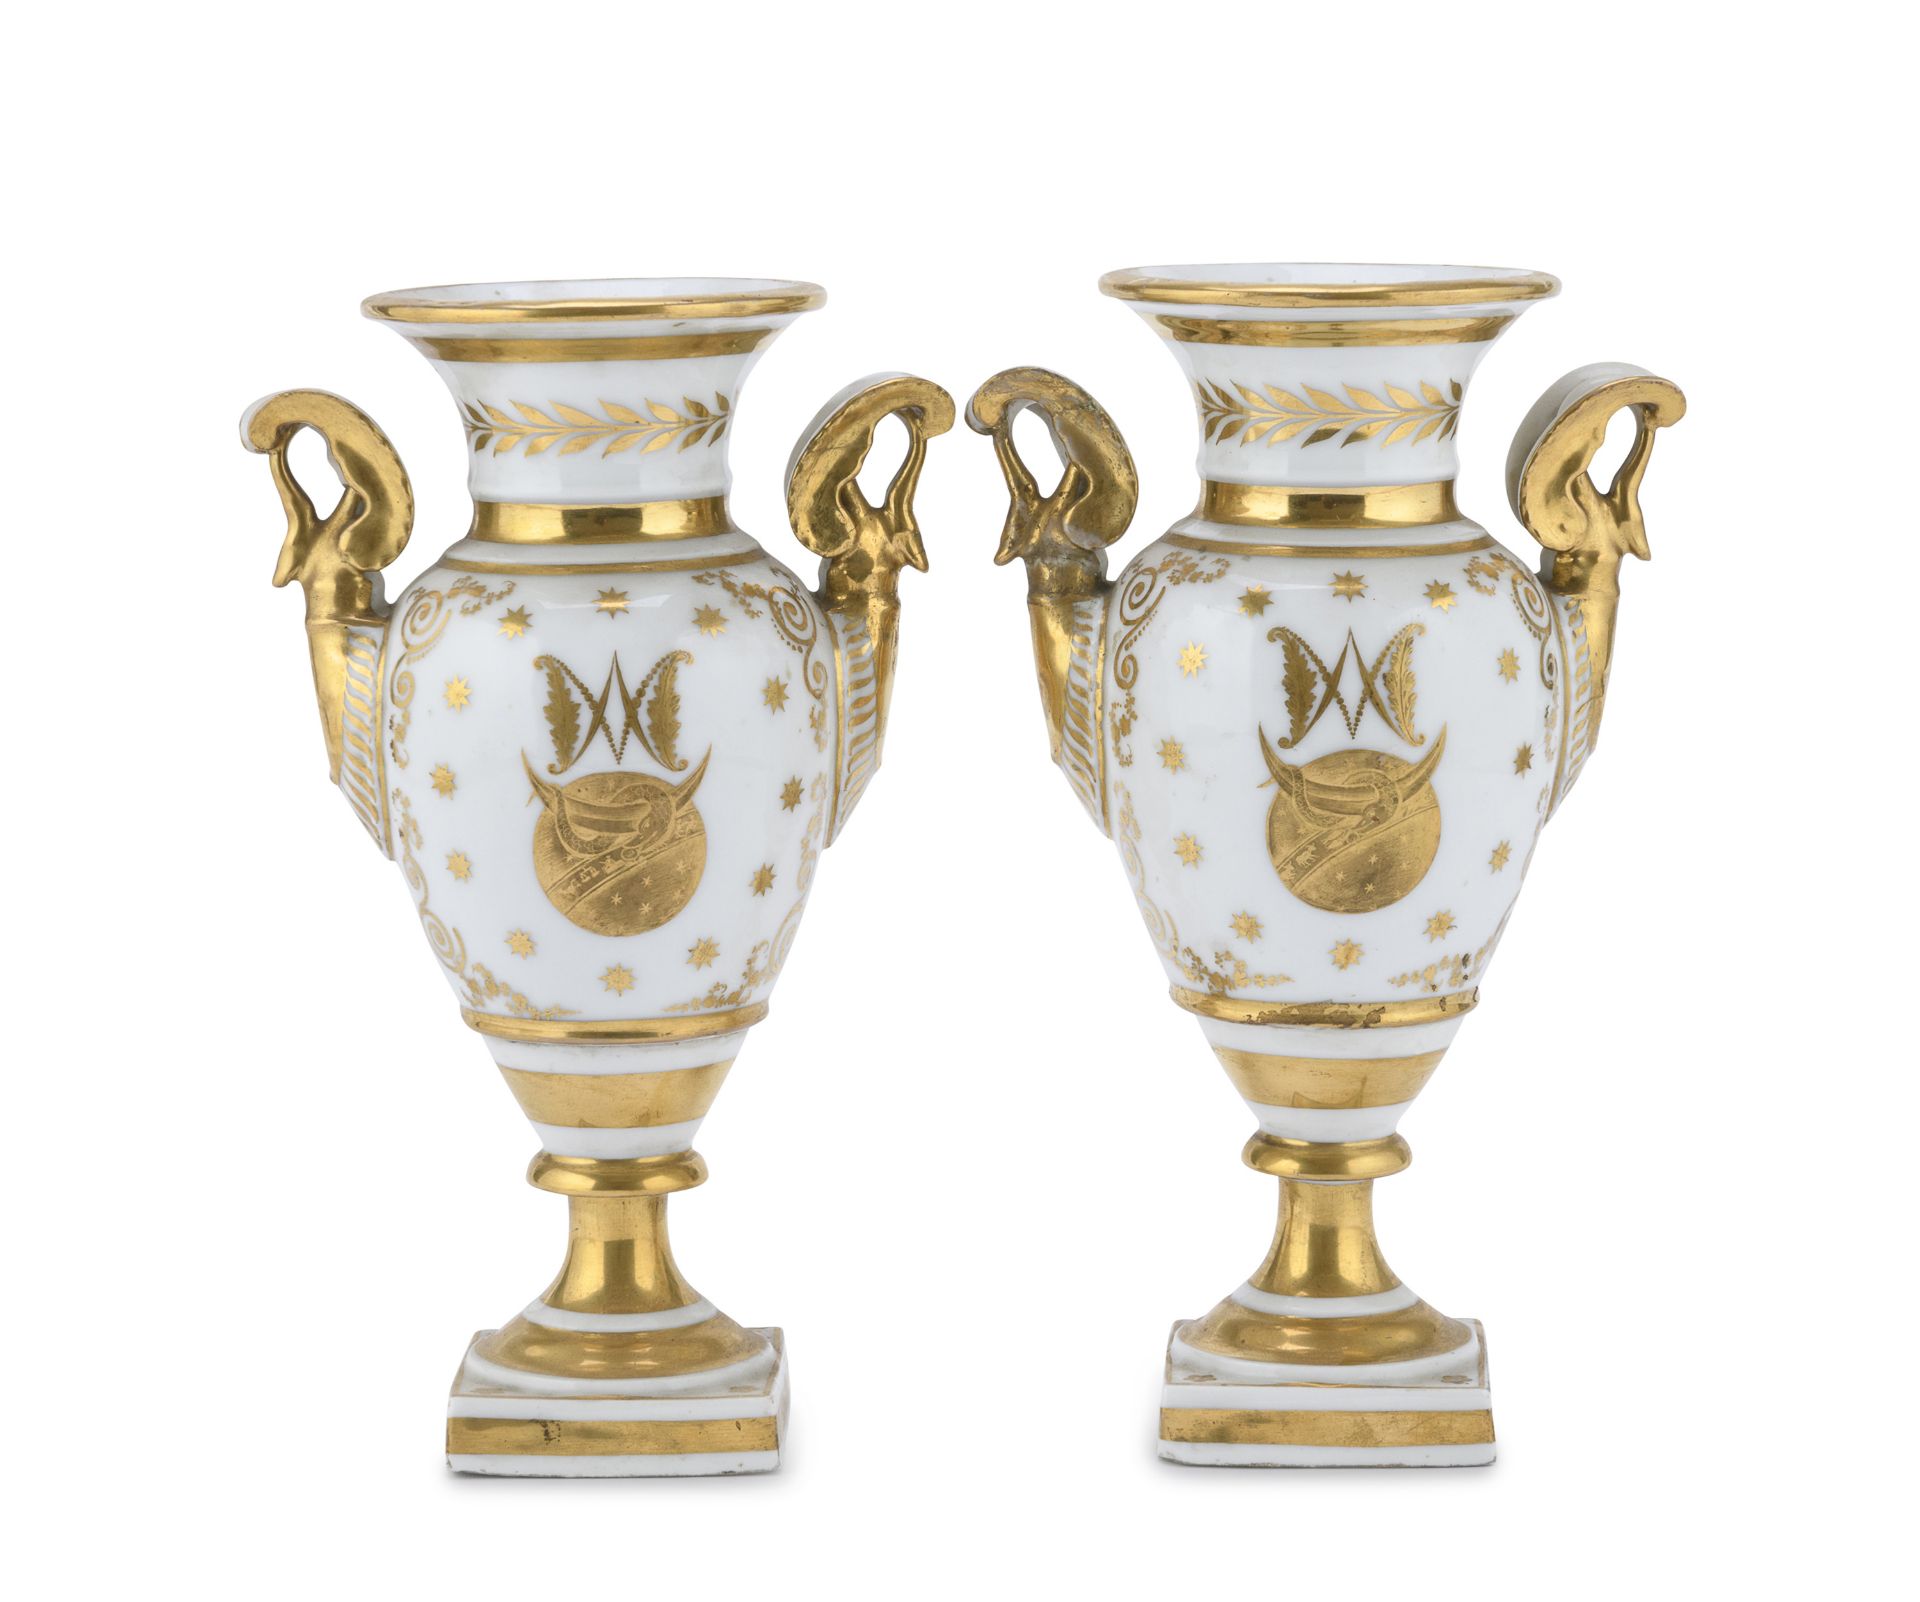 PAIR OF PORCELAIN VASES EARLY 19TH CENTURY